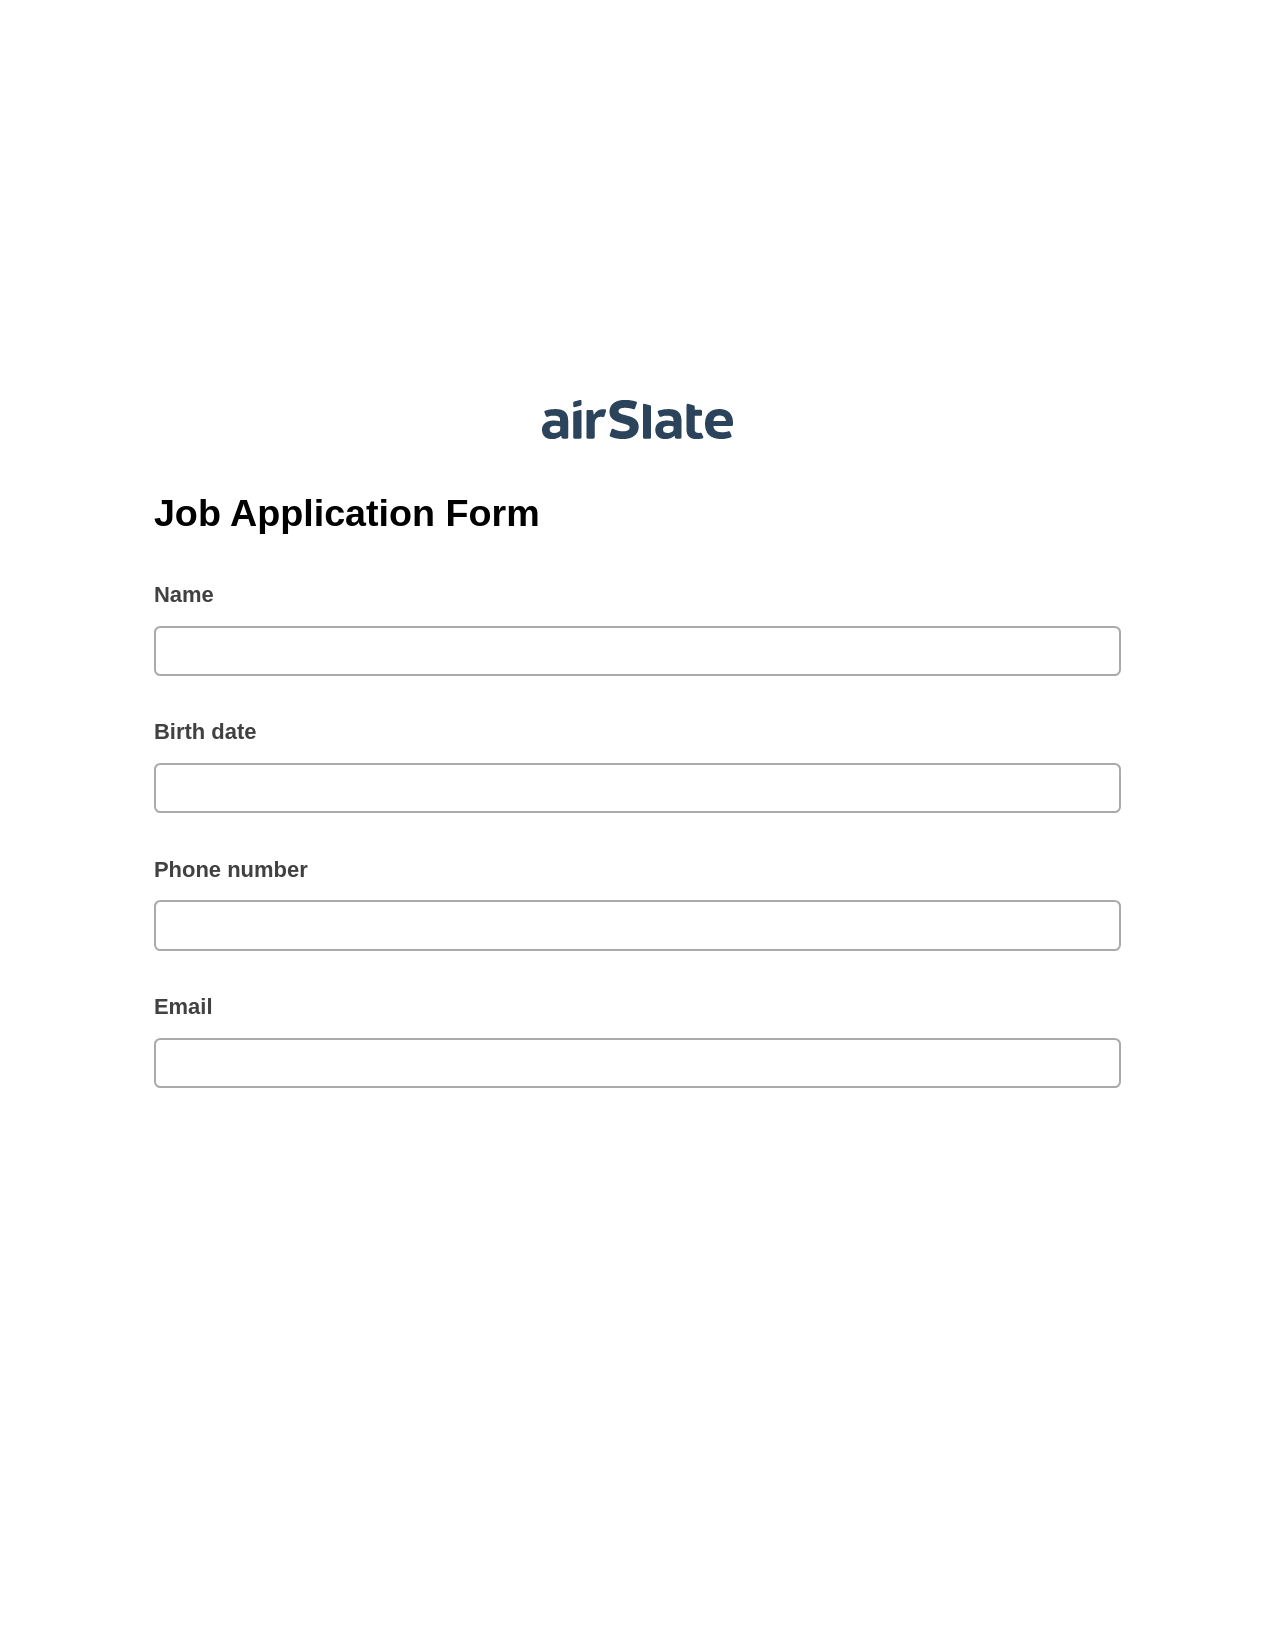 Job Application Form Pre-fill from Excel Spreadsheet Bot, Create slate from another Flow Bot, Export to Formstack Documents Bot